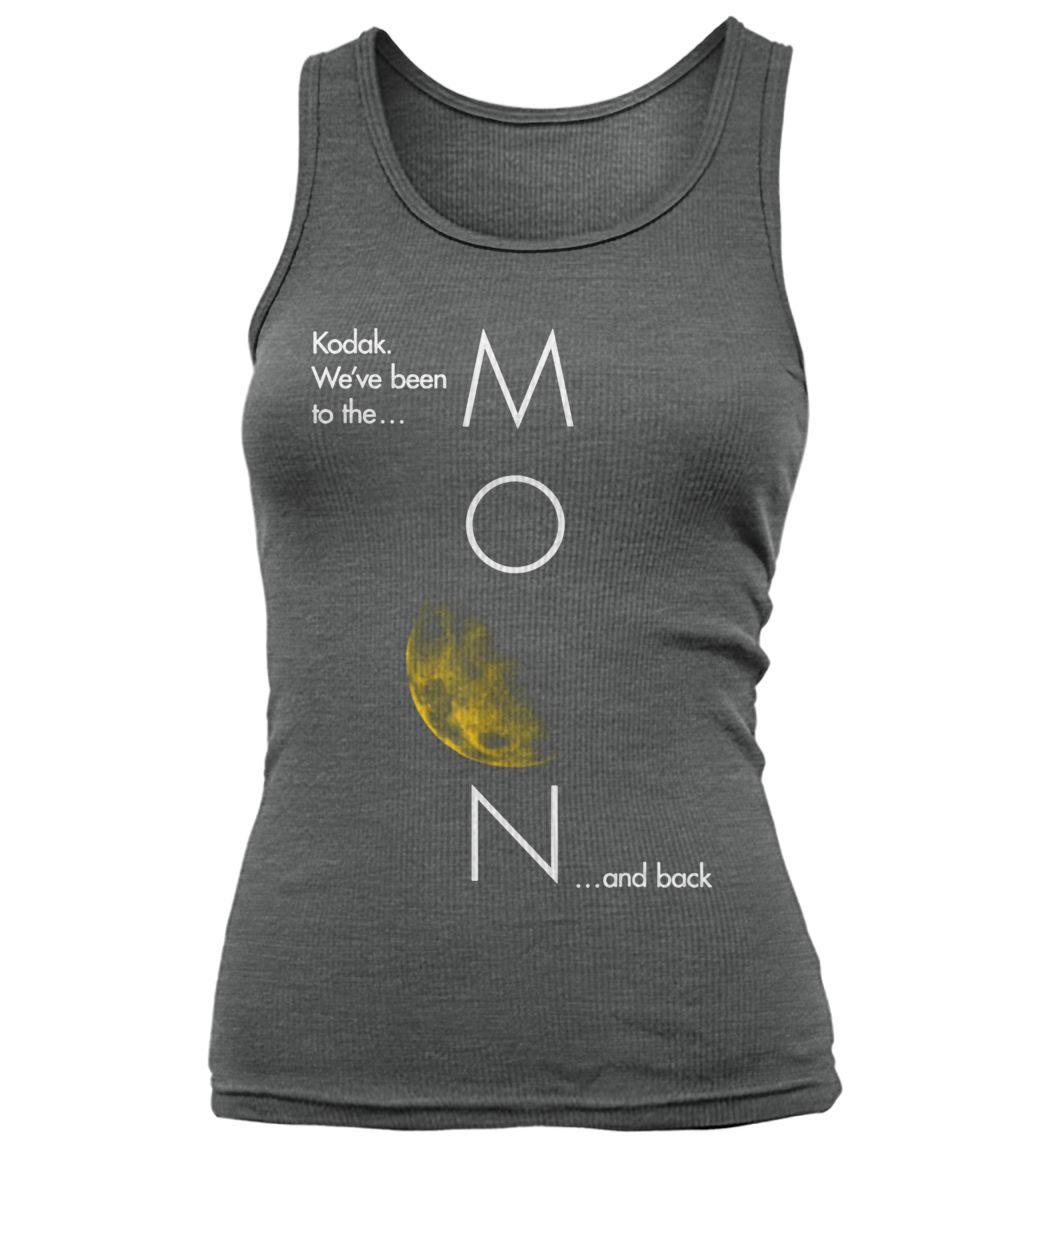 Kodak been to the moon and back women's tank top